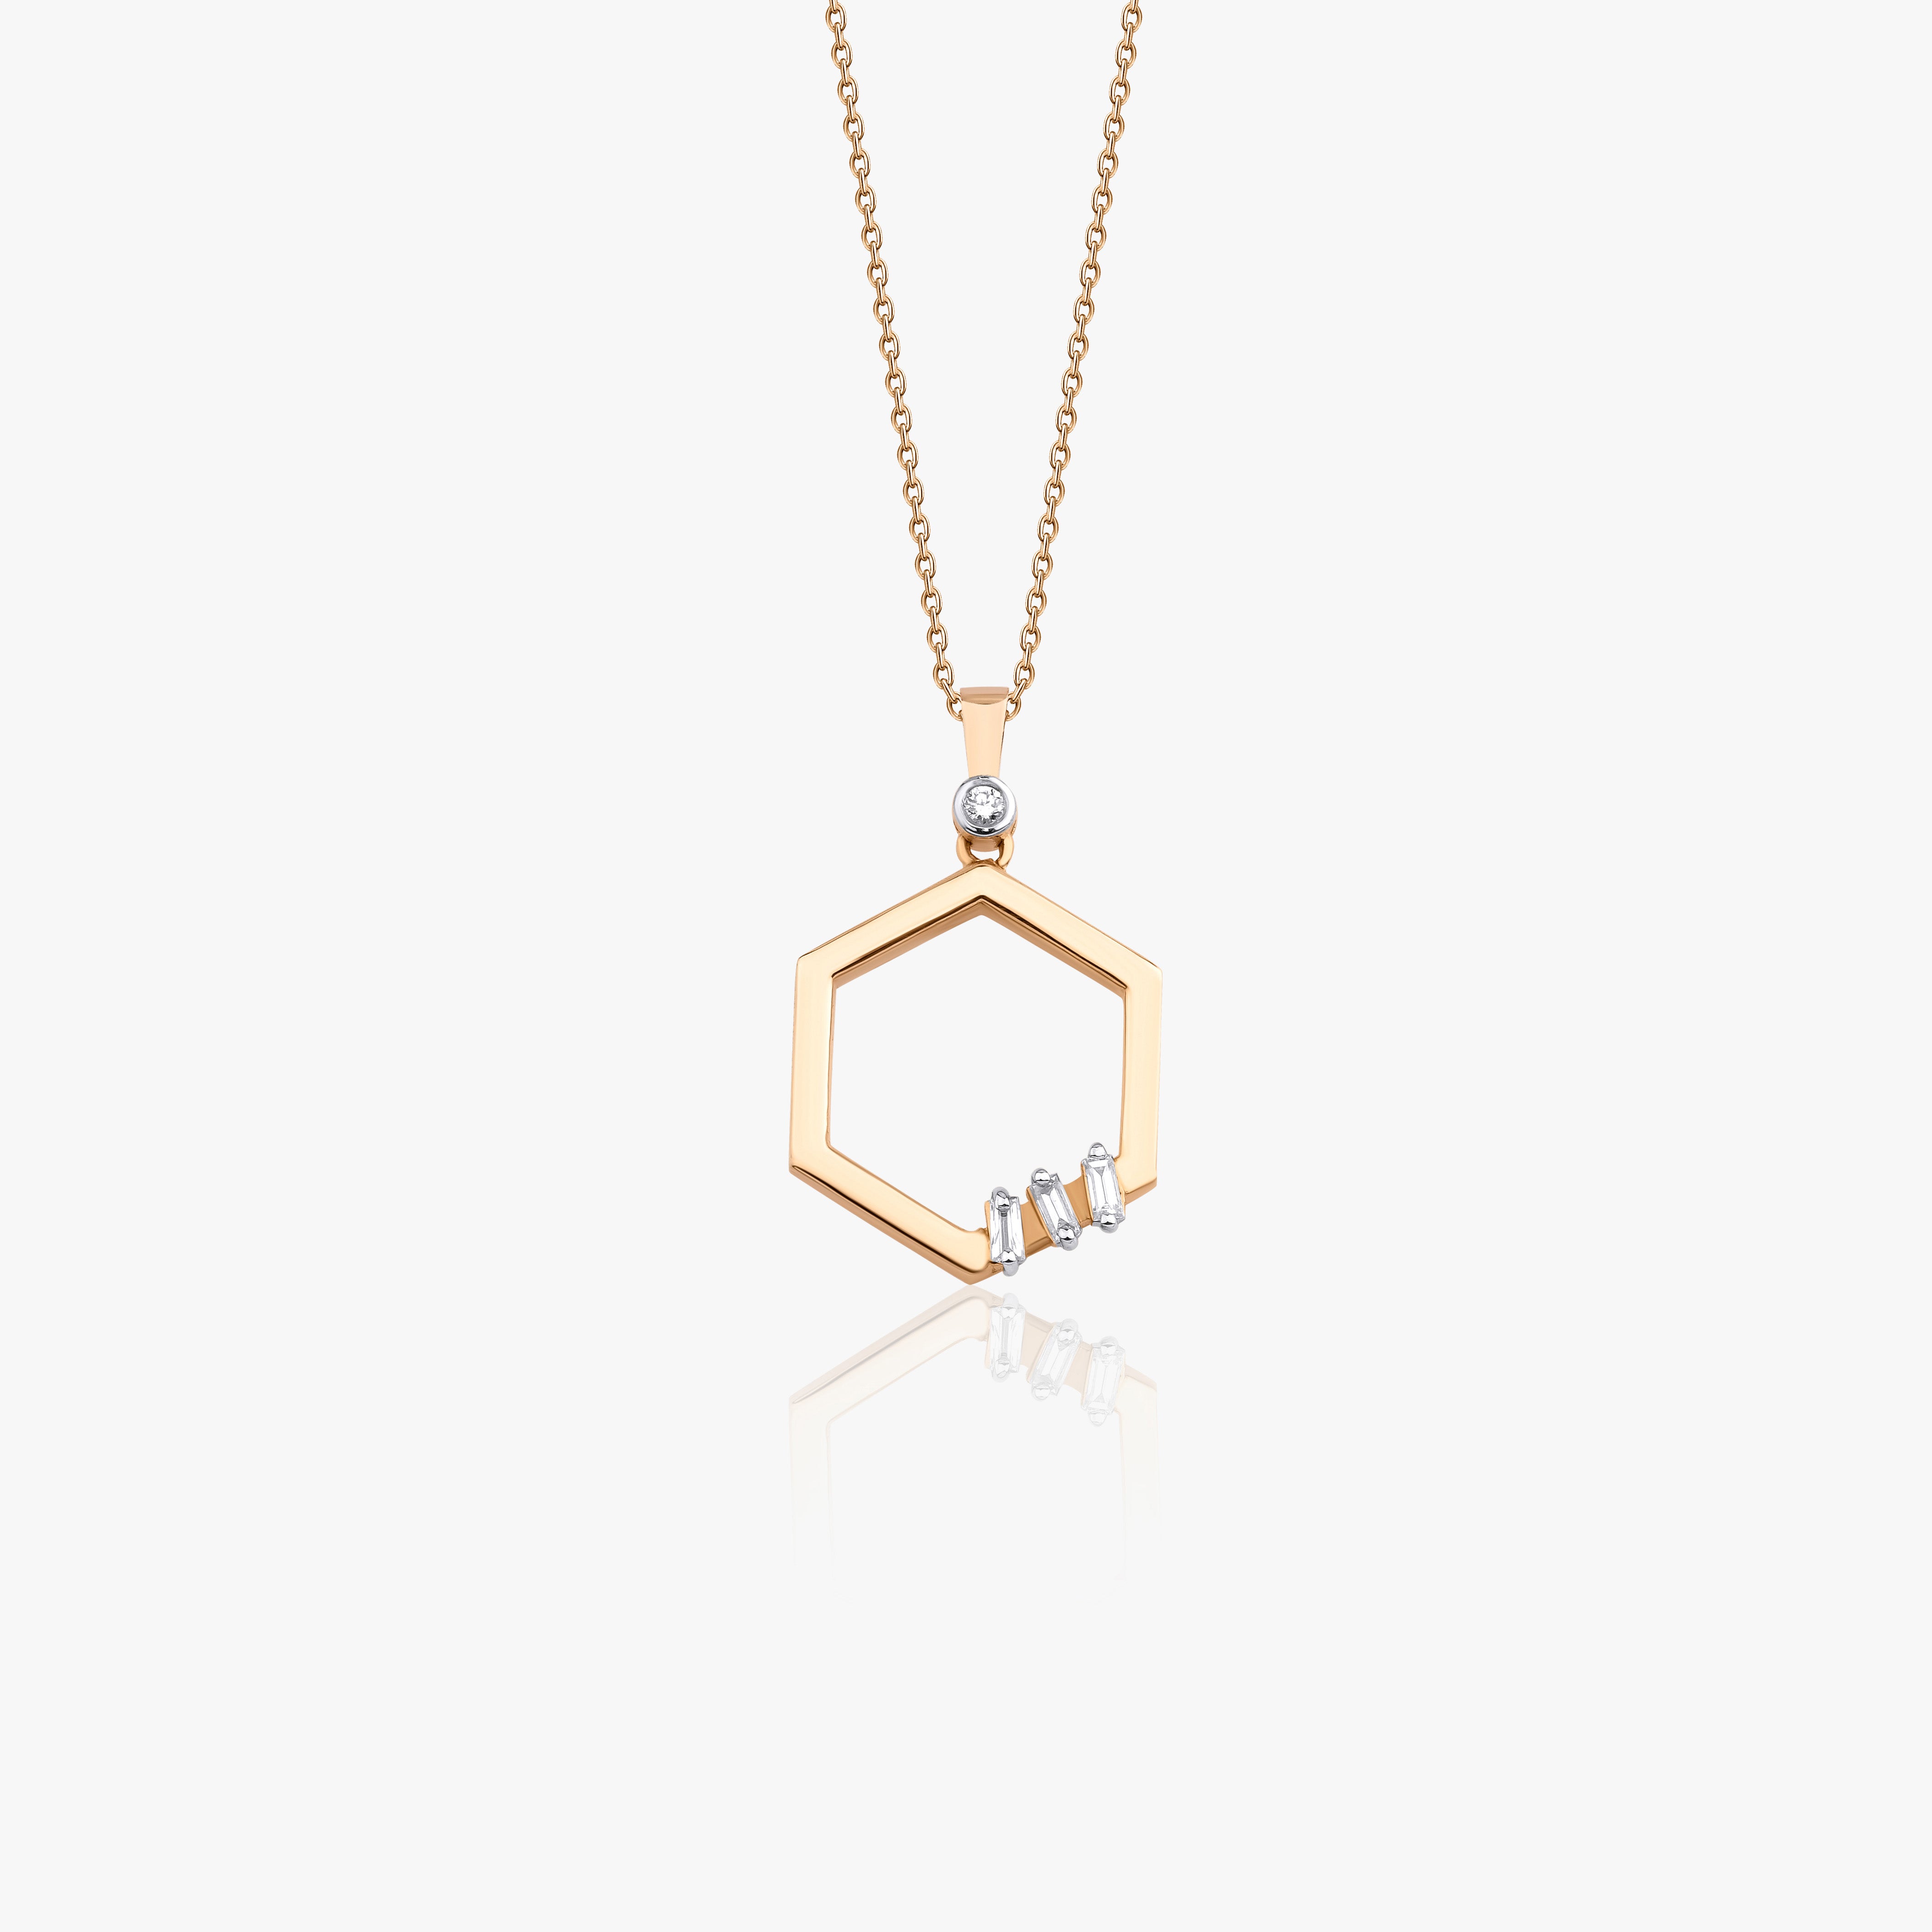 Diamond Hexagon Necklace Available in 14K and 18K Gold